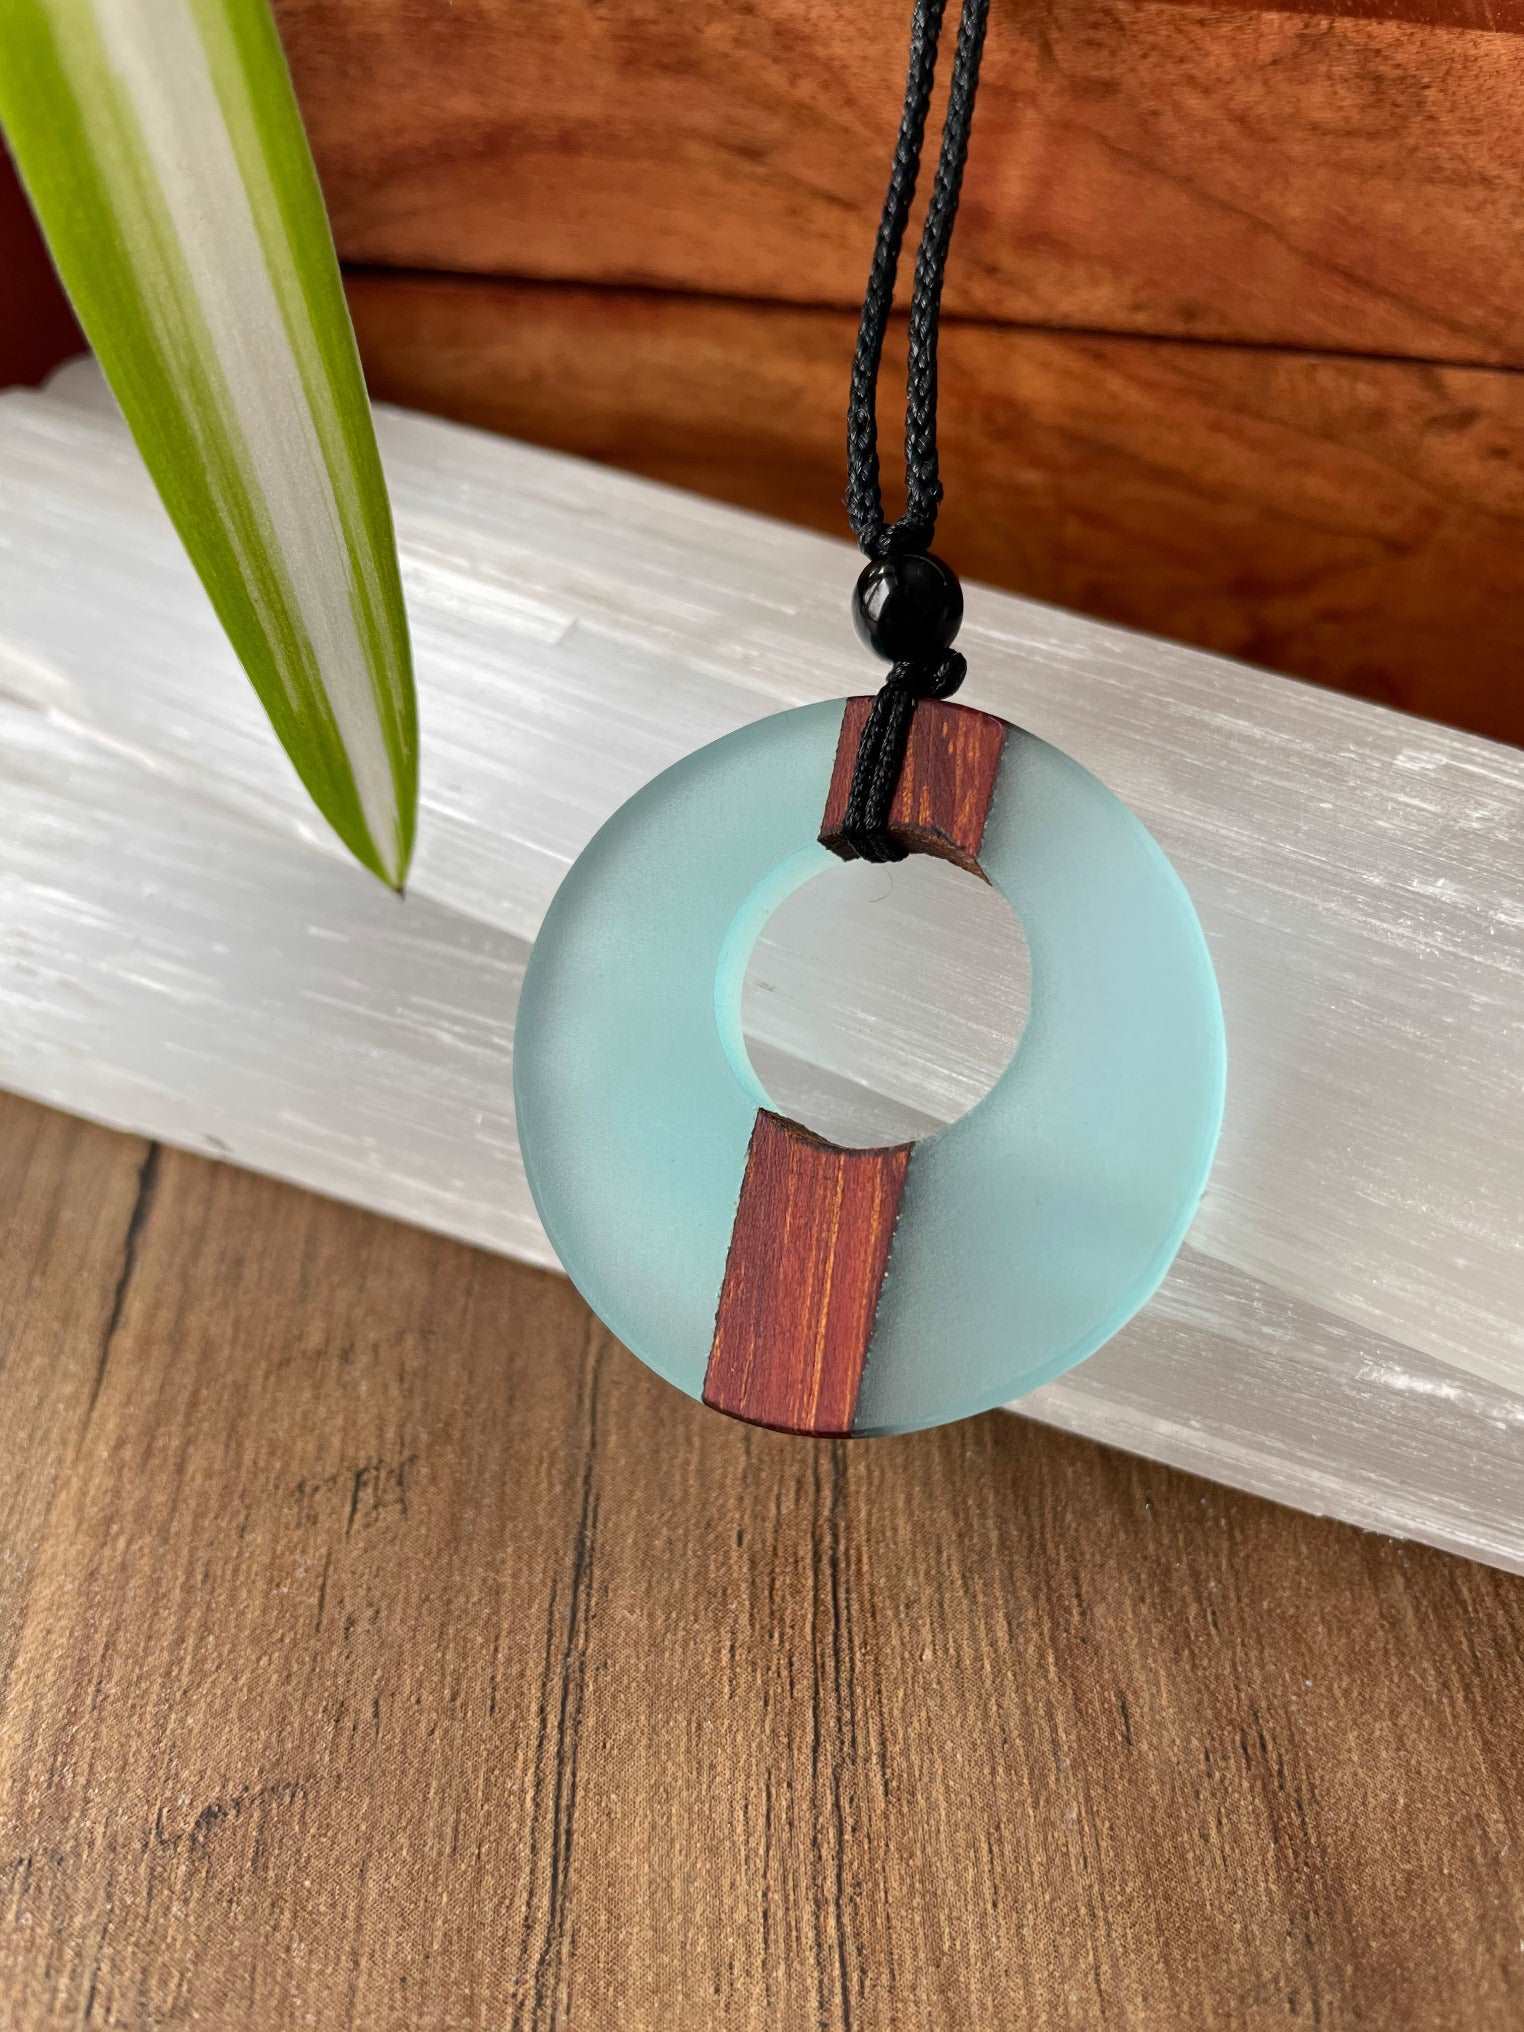 Pictured is a necklace made of wood and resin.